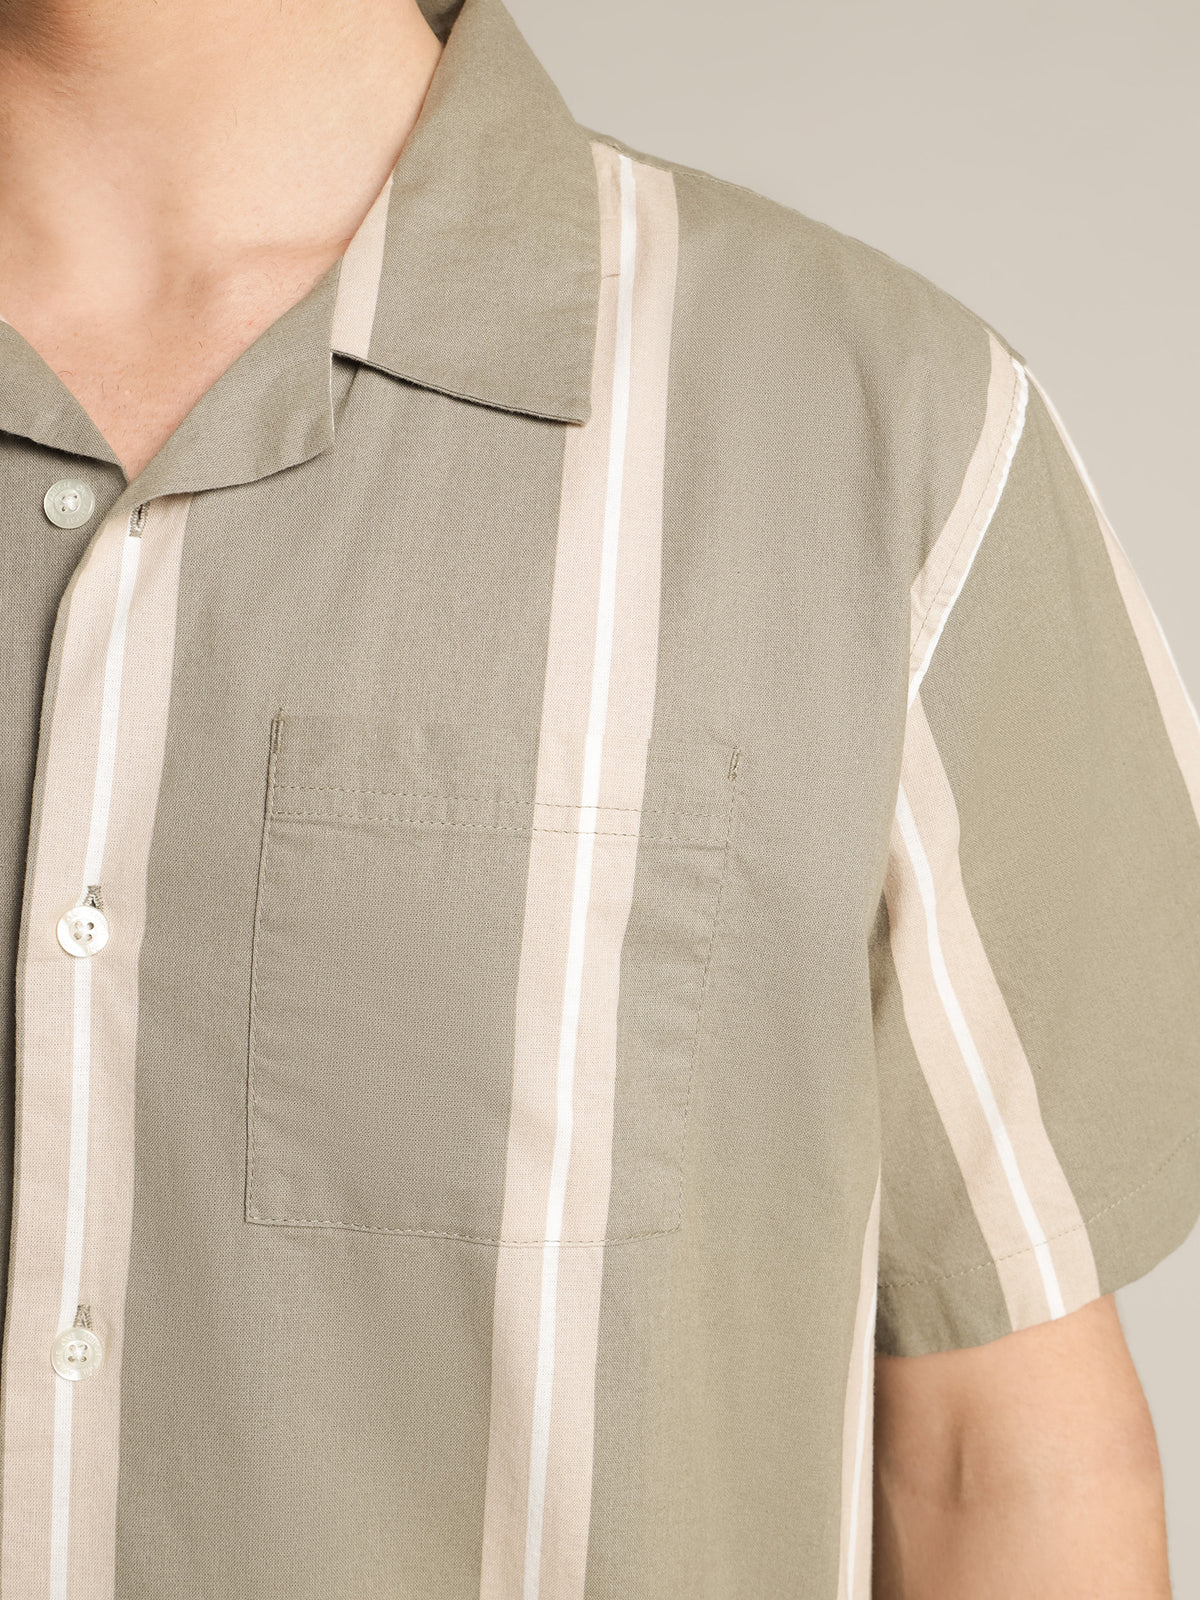 Linear Shirt in Thistle